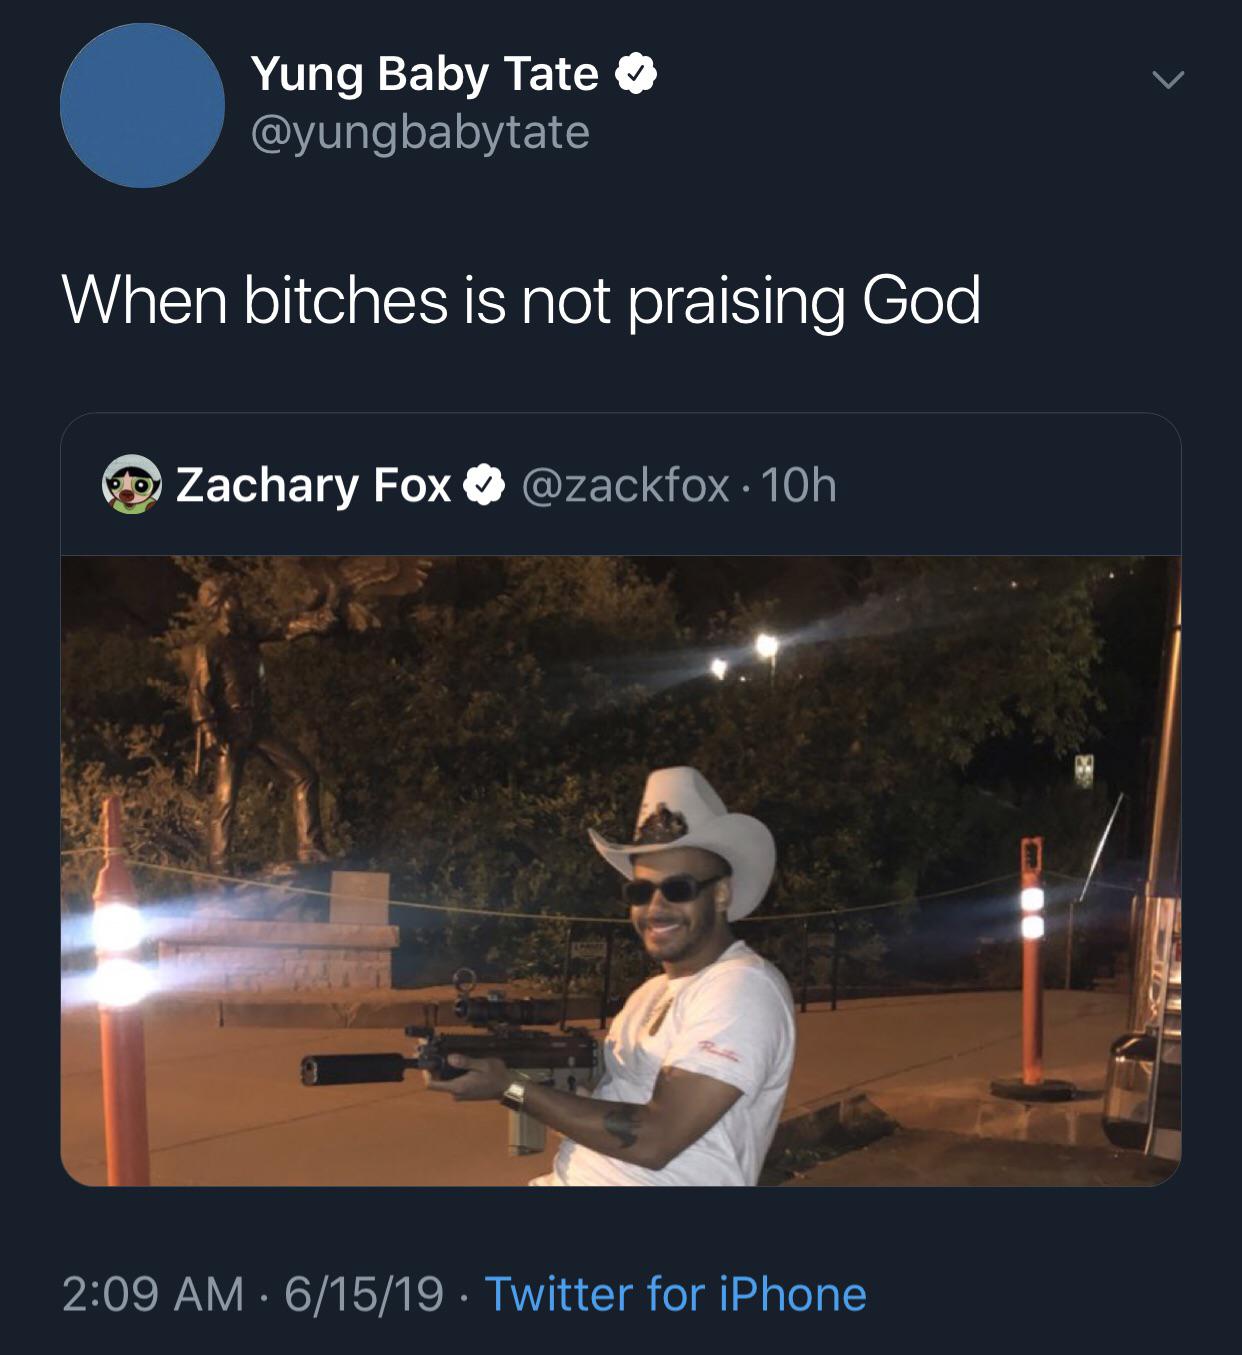 sky - Yung Baby Tate When bitches is not praising God Zachary Fox 10h 61519. Twitter for iPhone